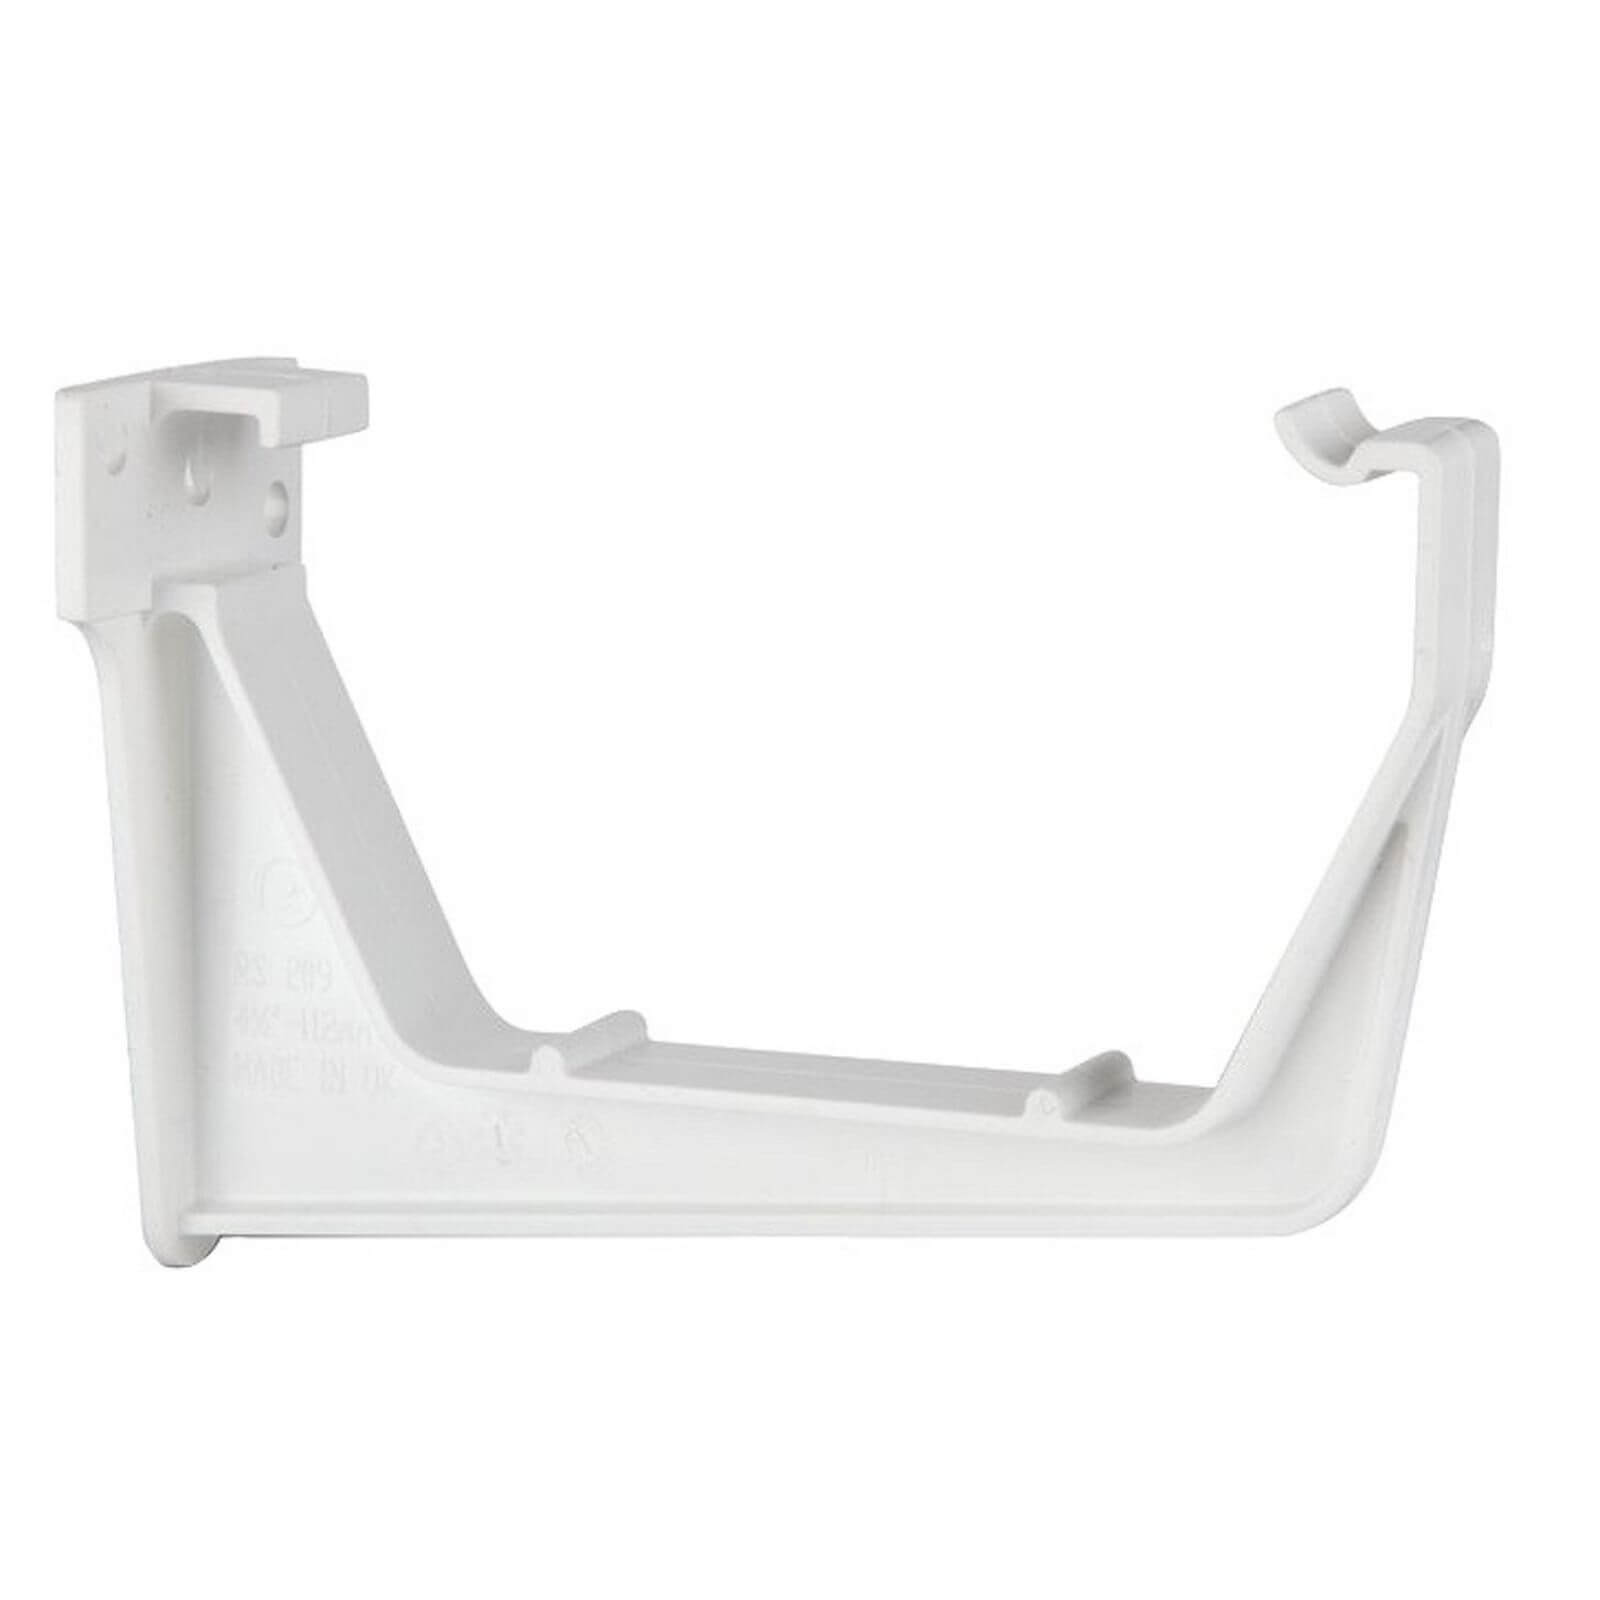 Polypipe Square Gutter Fascia Bracket - 112mm - White